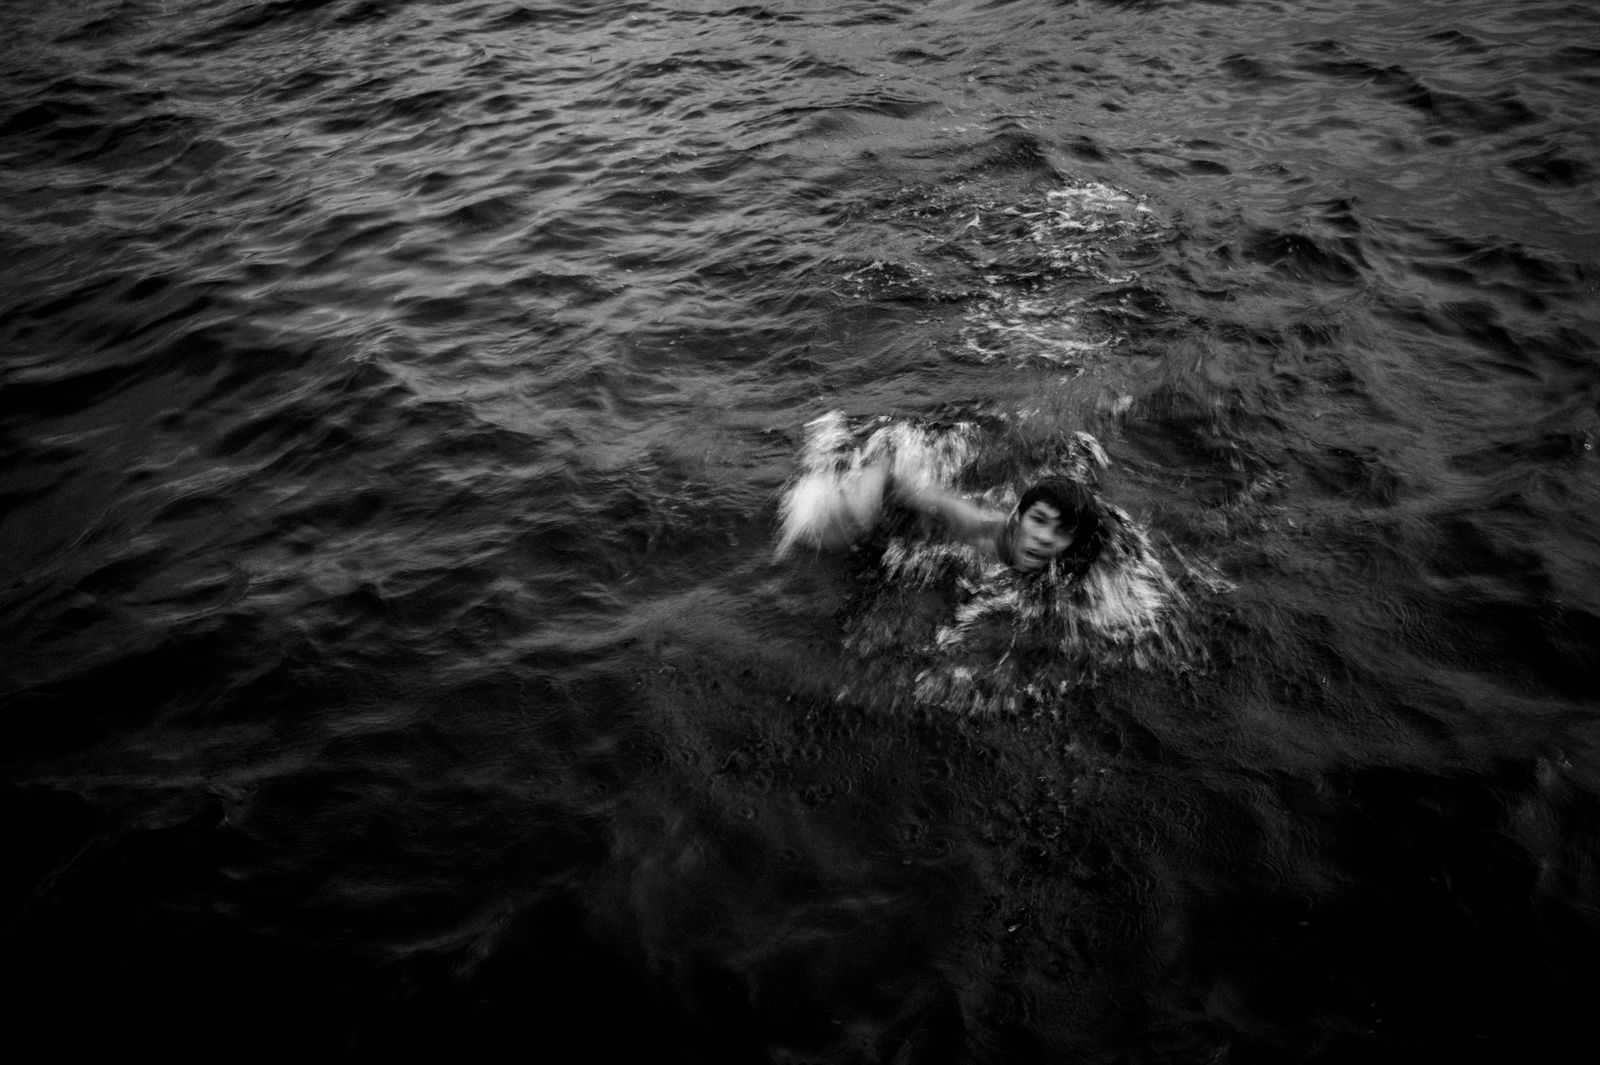 © Raphael Alves - Image from the Riversick photography project